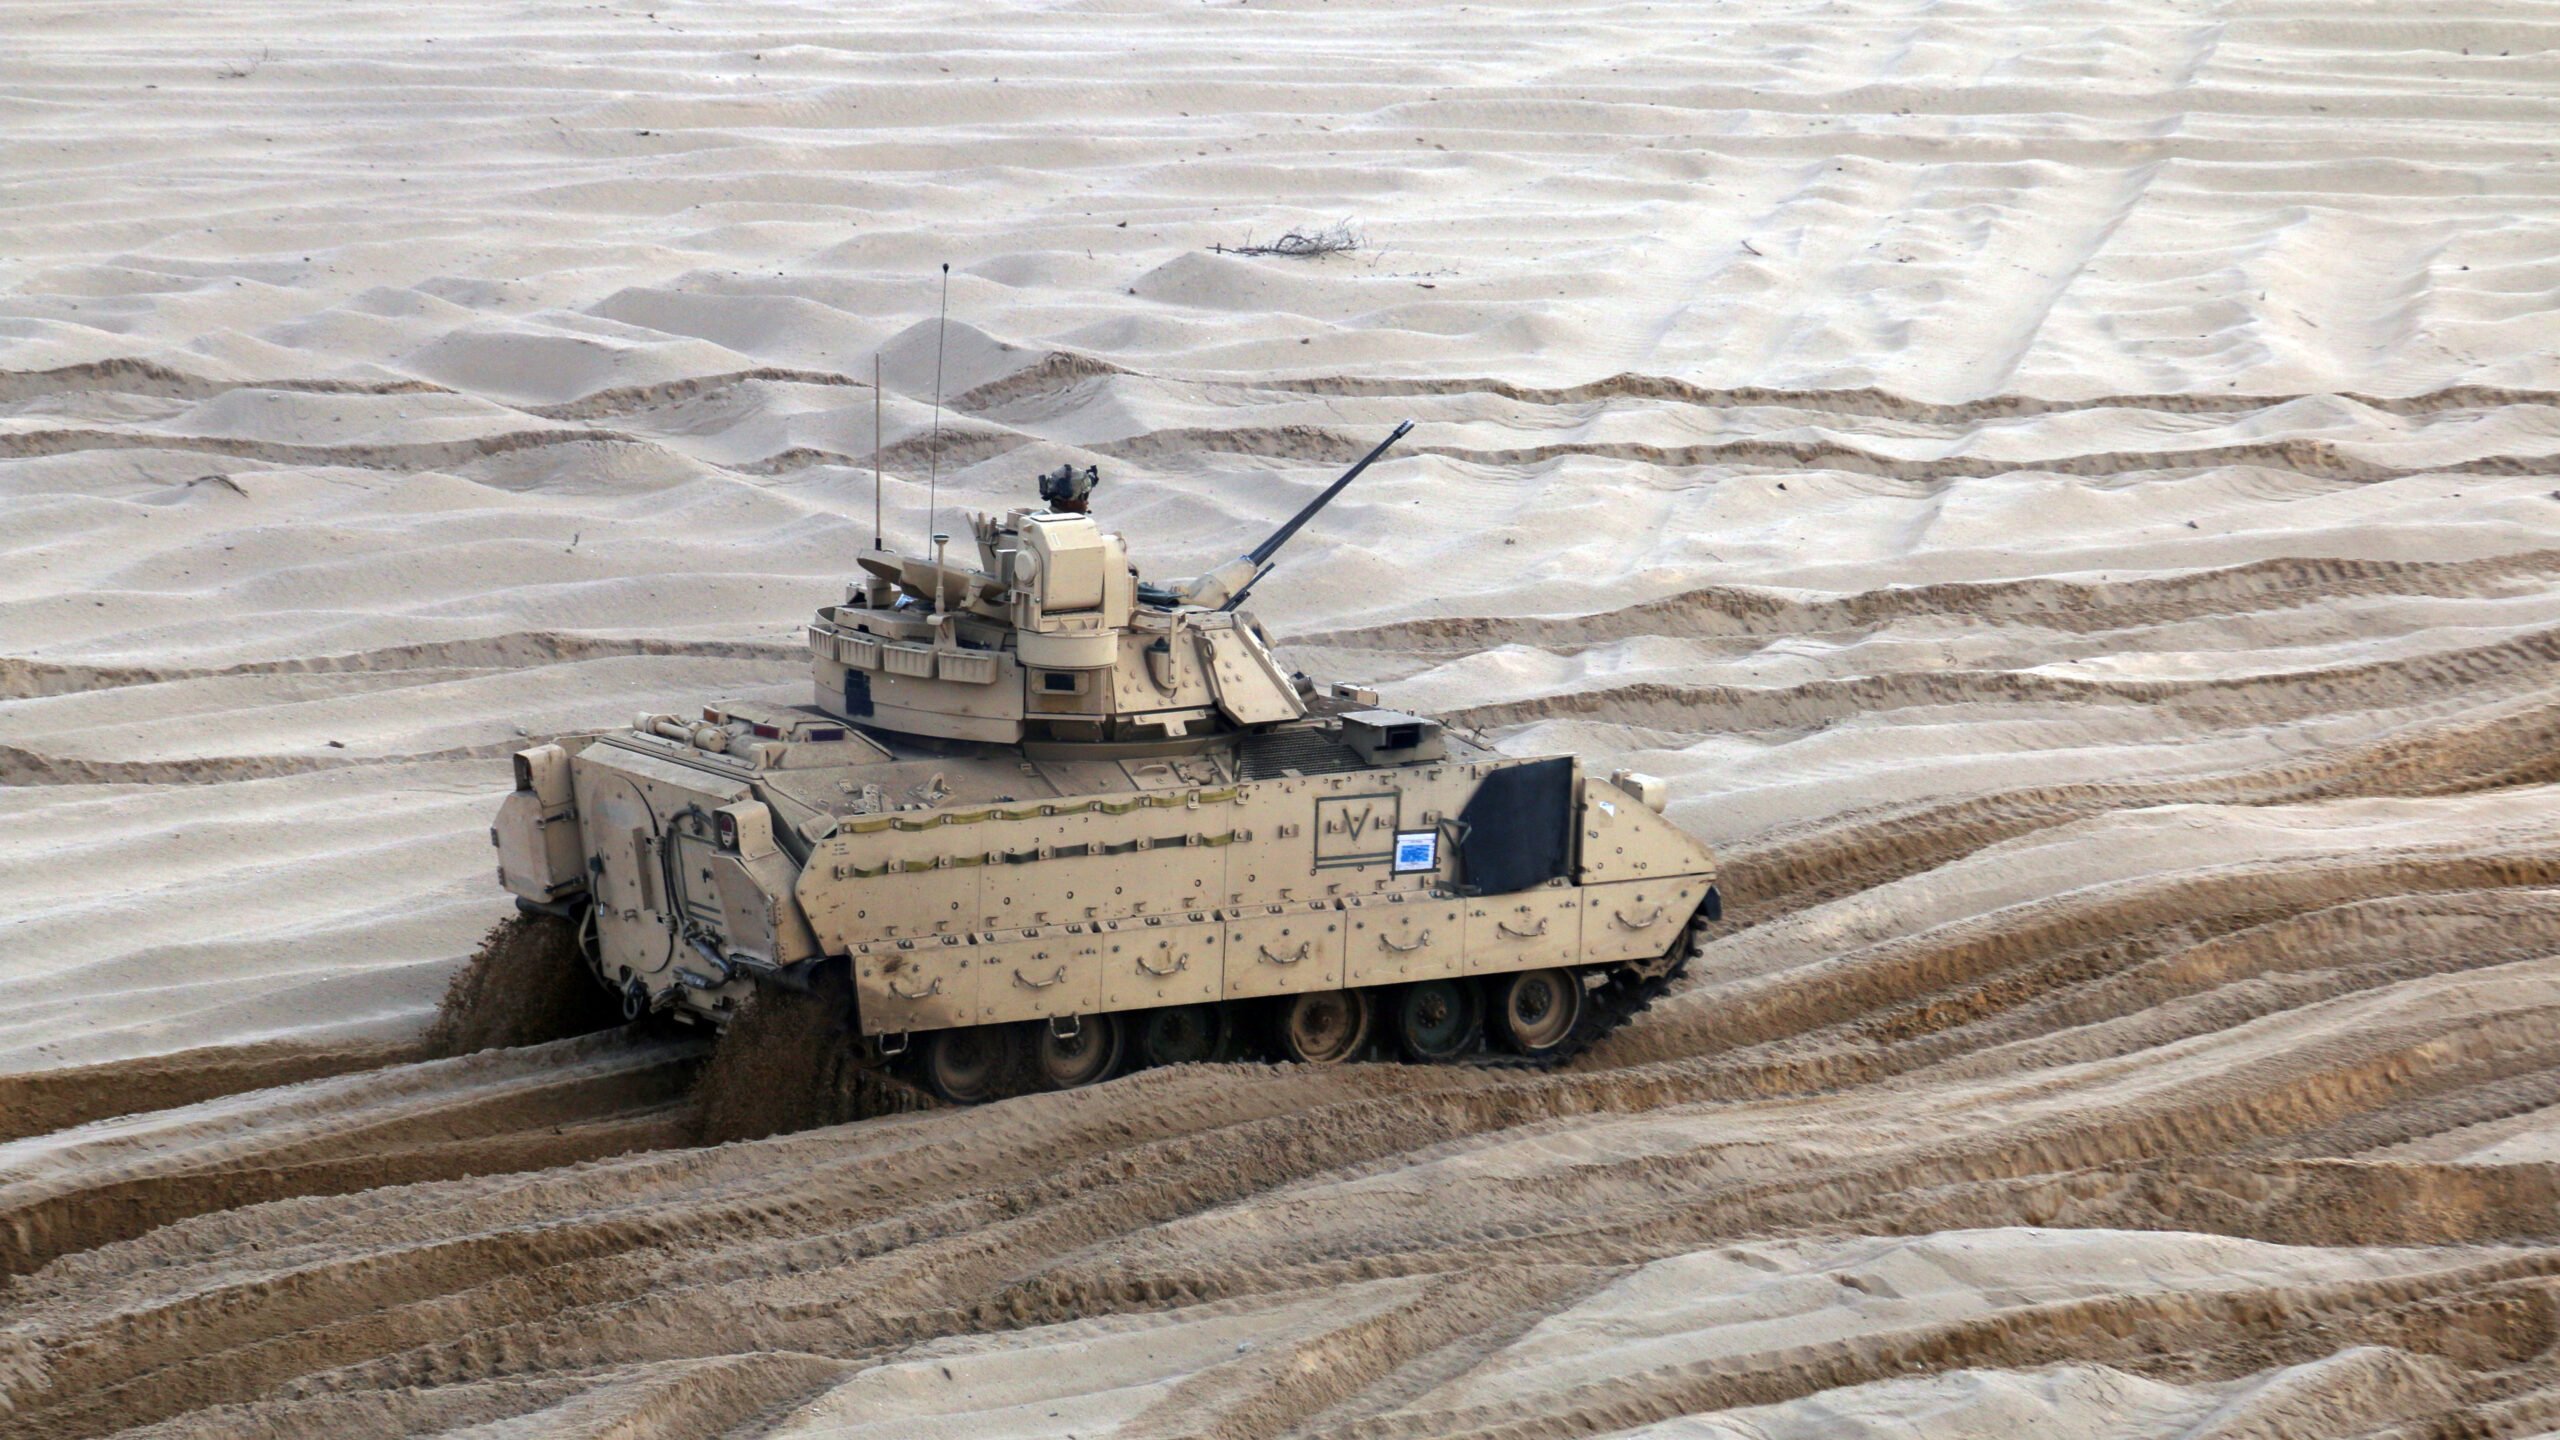 XM30 Optionally Manned Fighting Vehicle OMFV Archives - Breaking Defense